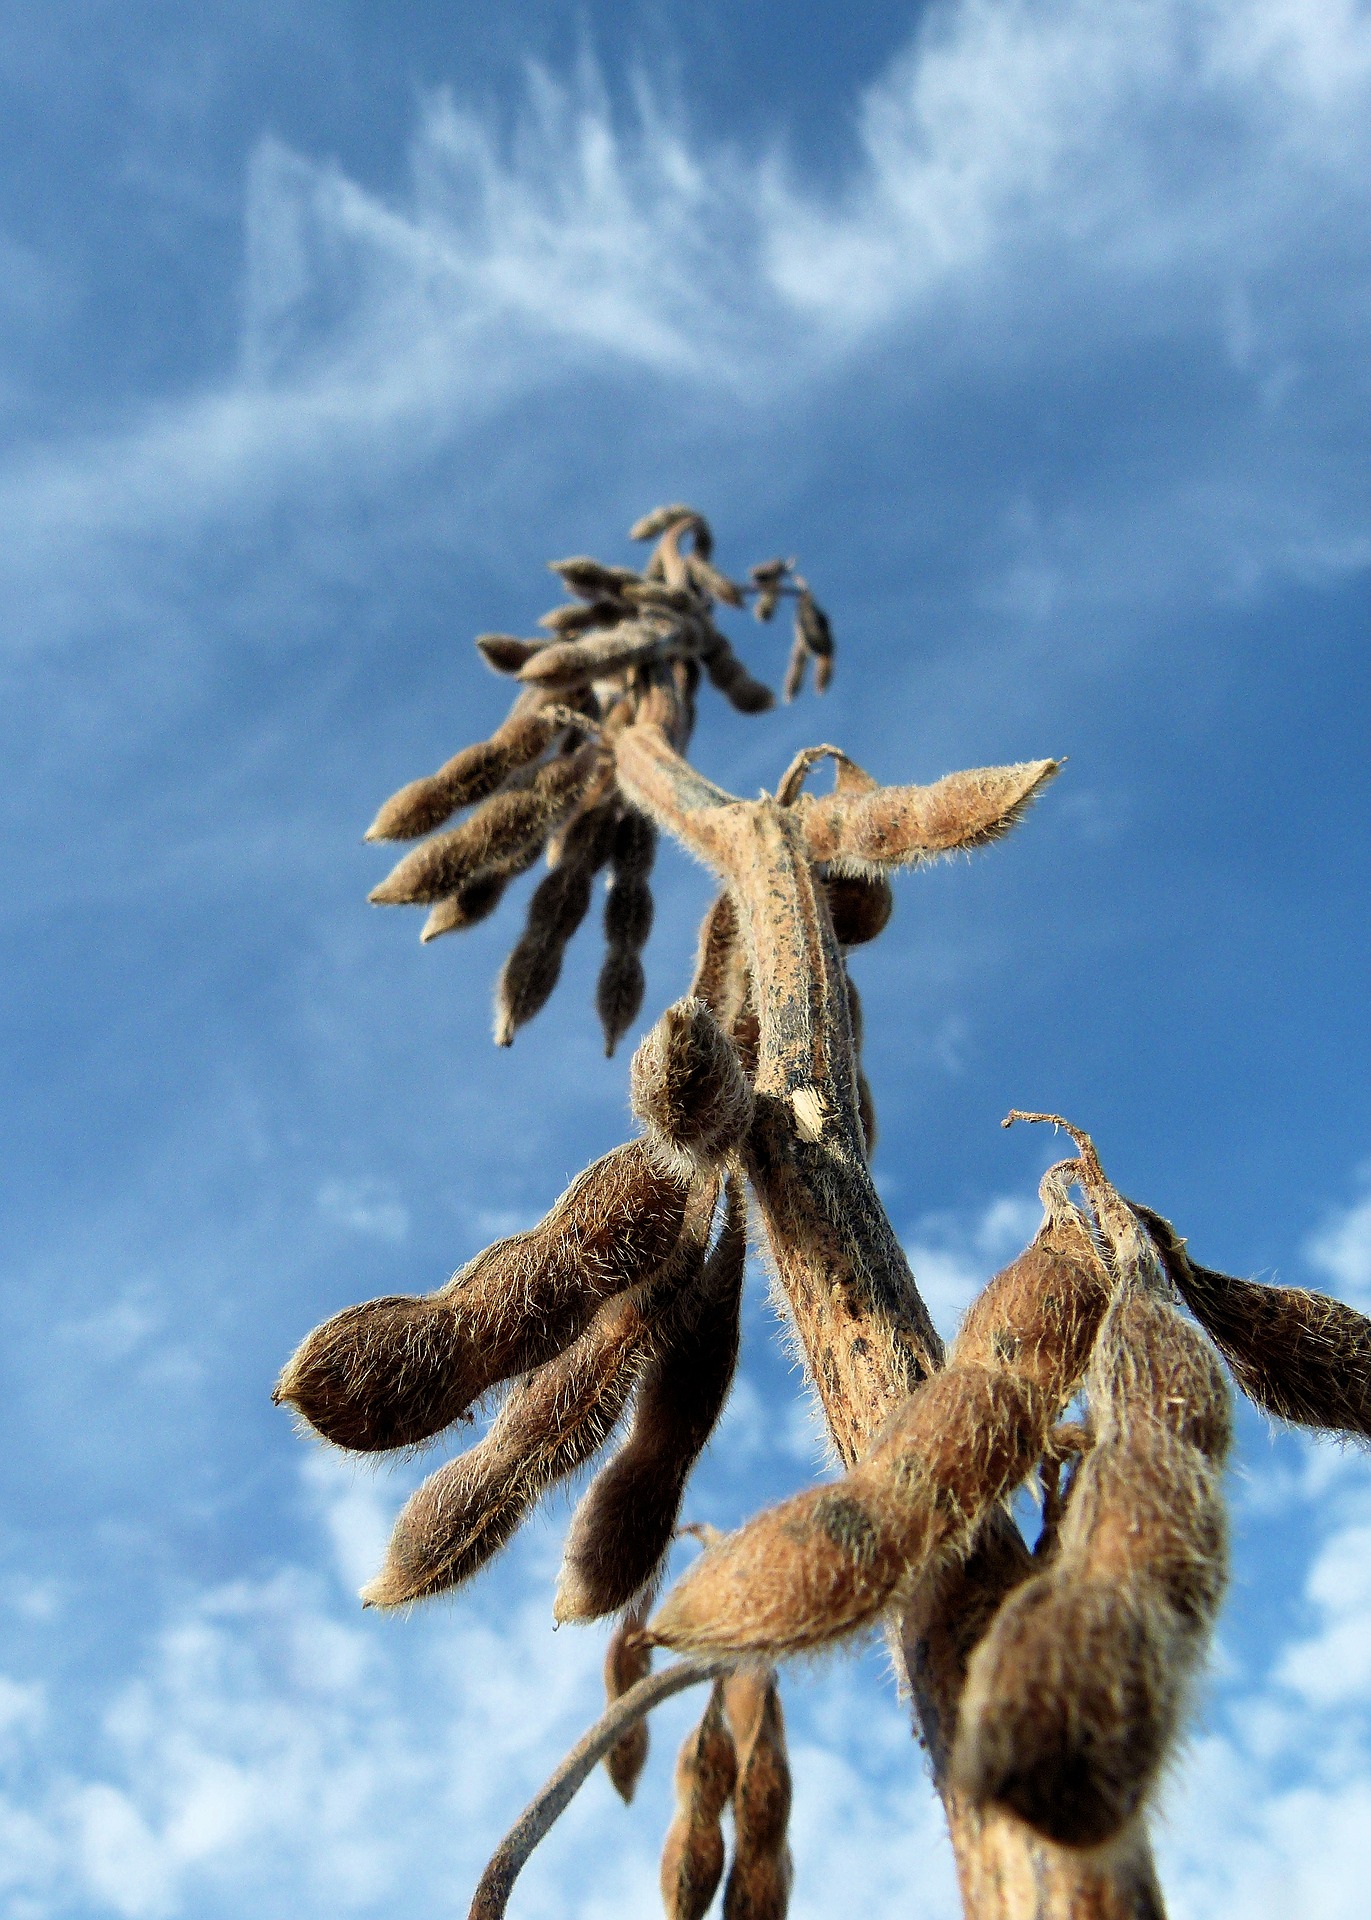 Soy hulls are a by-product of soybean production. Image by Daina Krumins.